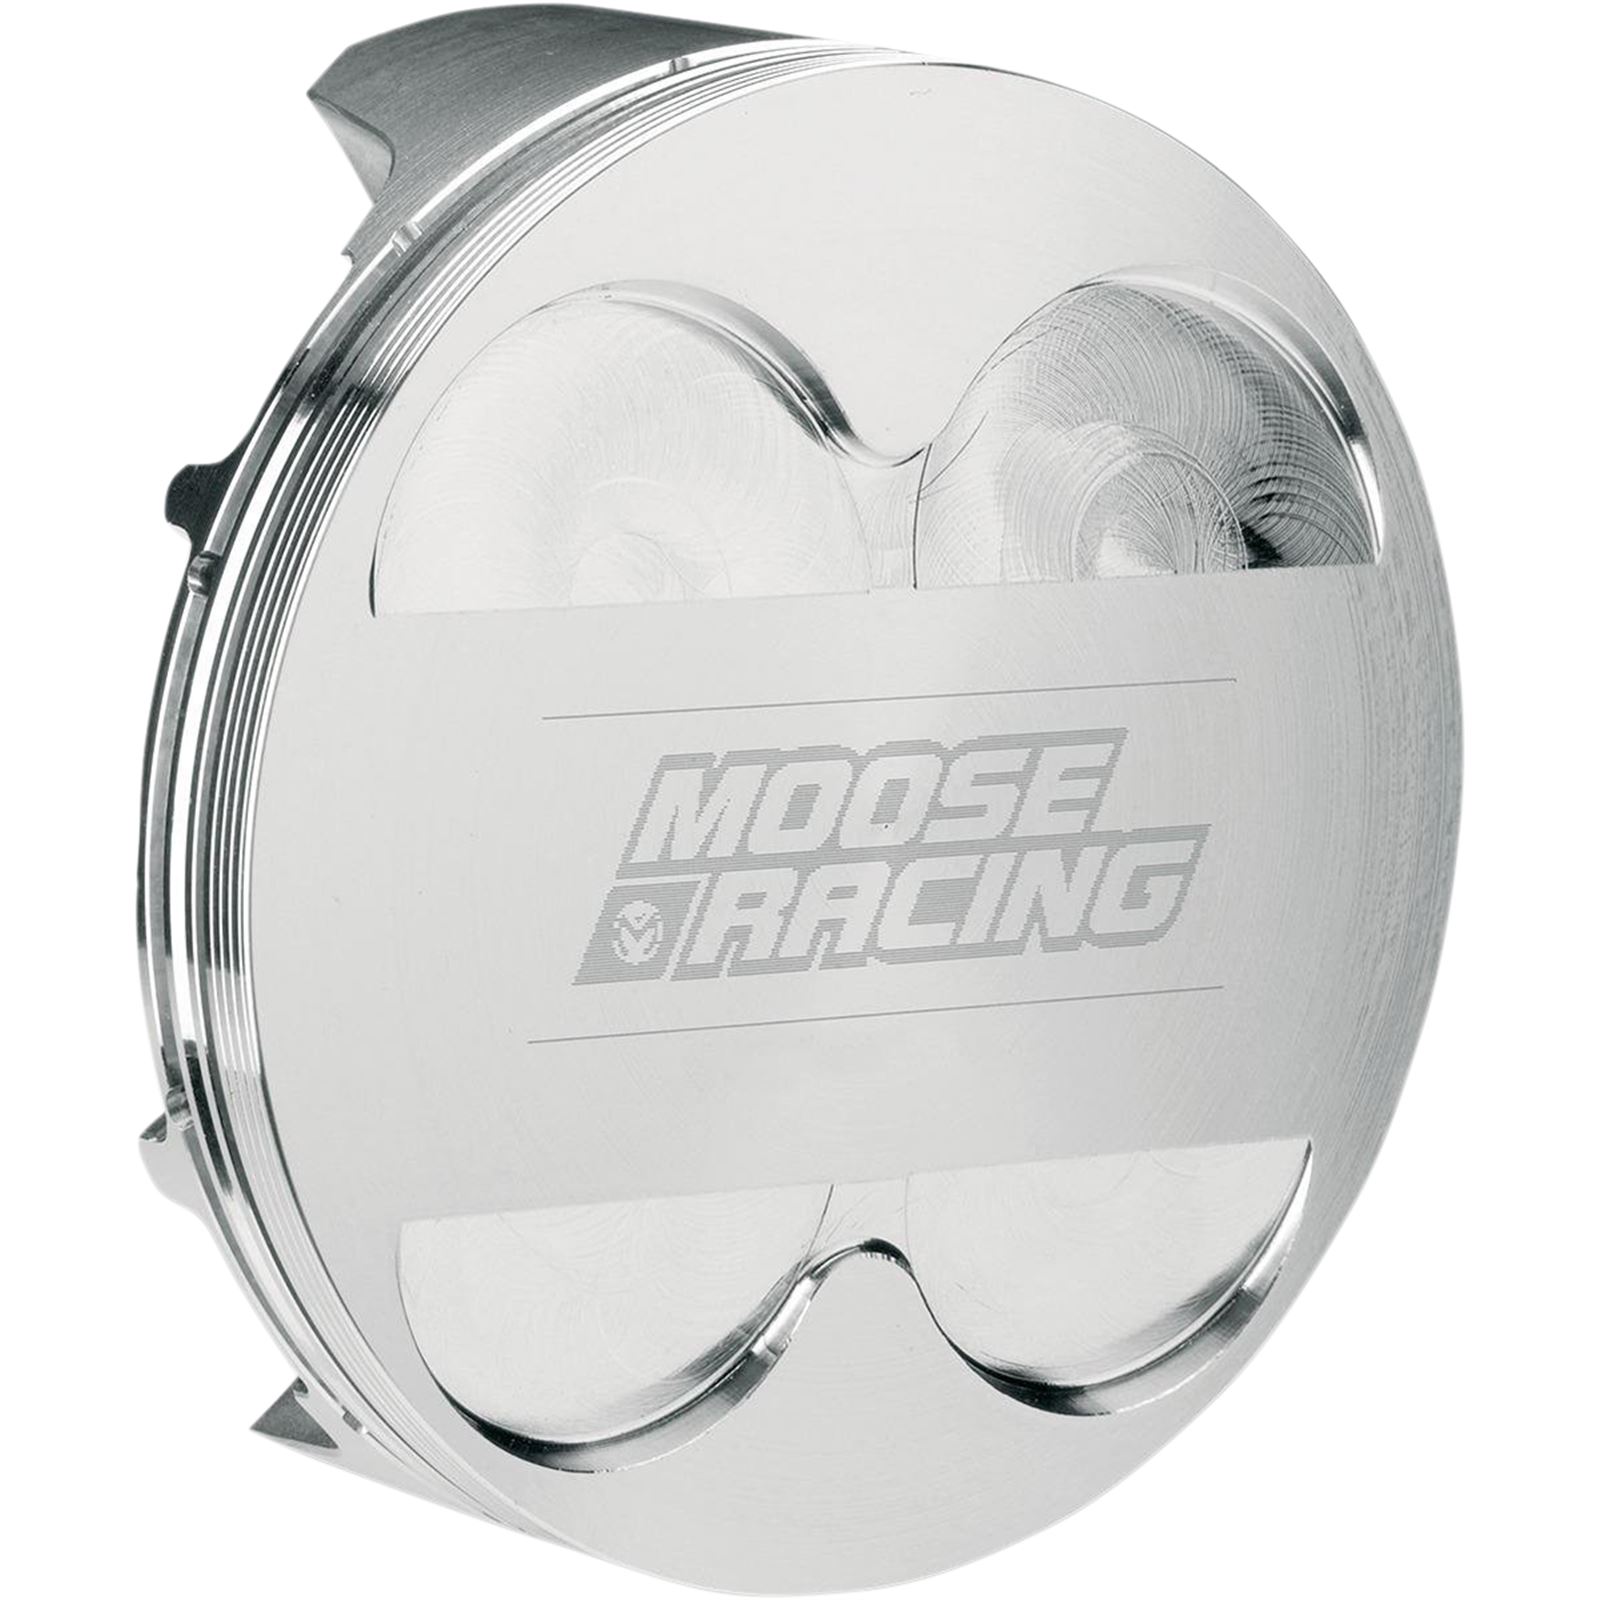 Moose Racing | Purchase Moose Racing Parts  Products from the Powersports  Experts at Motomentum - Motorcycle, ATV / UTV  Powersports Parts | The  Best Powersports, Motorcycle, ATV  Snow Gear, Accessories and More